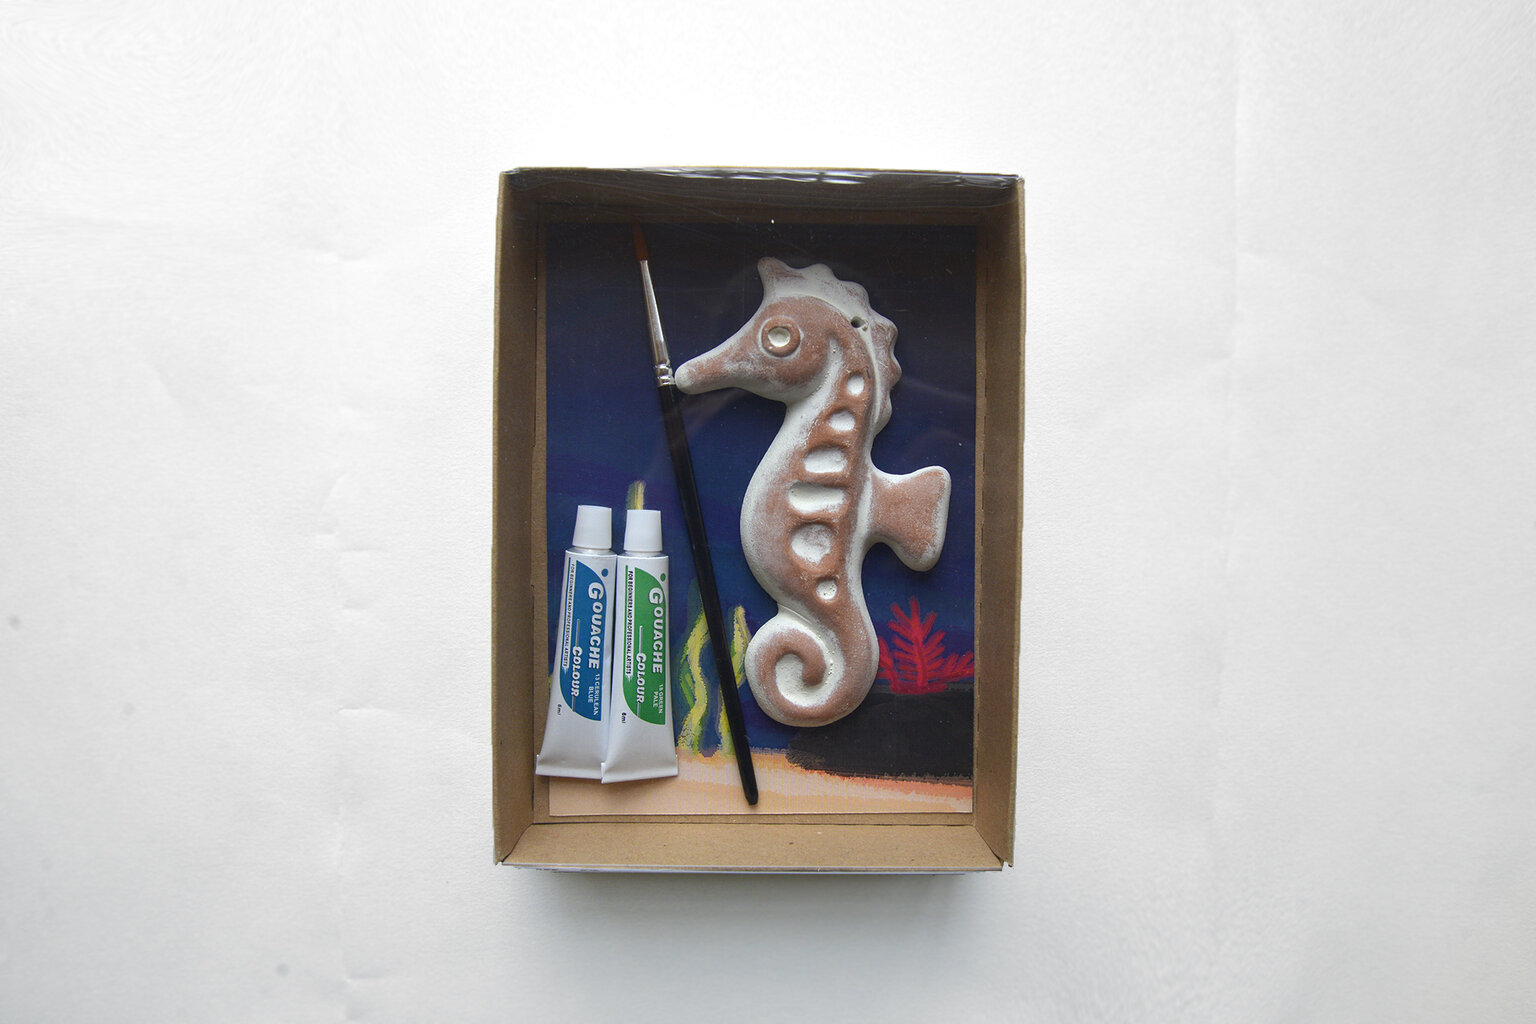 "Painting the seahorse" kit